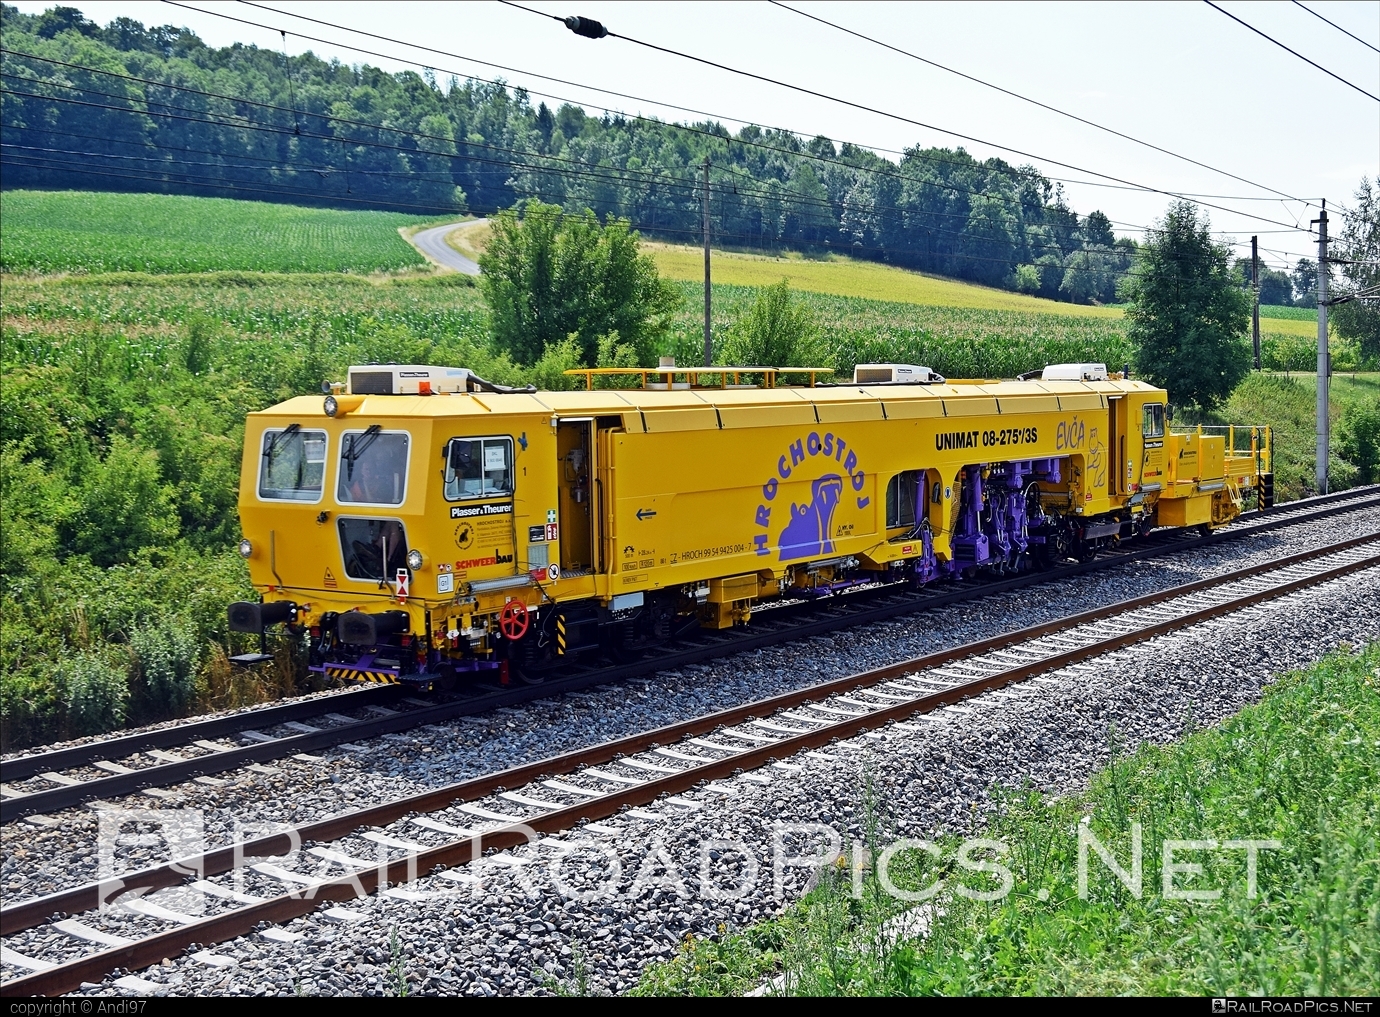 Plasser & Theurer Unimat Combi 08-275 - 9425 004-7 operated by HROCHOSTROJ a.s. #PlasserAndTheurerUnimatCombi08275 #PlasserTheurerUnimatCombi08275 #UnimatCombi08275 #hroch #hrochostroj #plasserAndTheurer #plasserTheurer